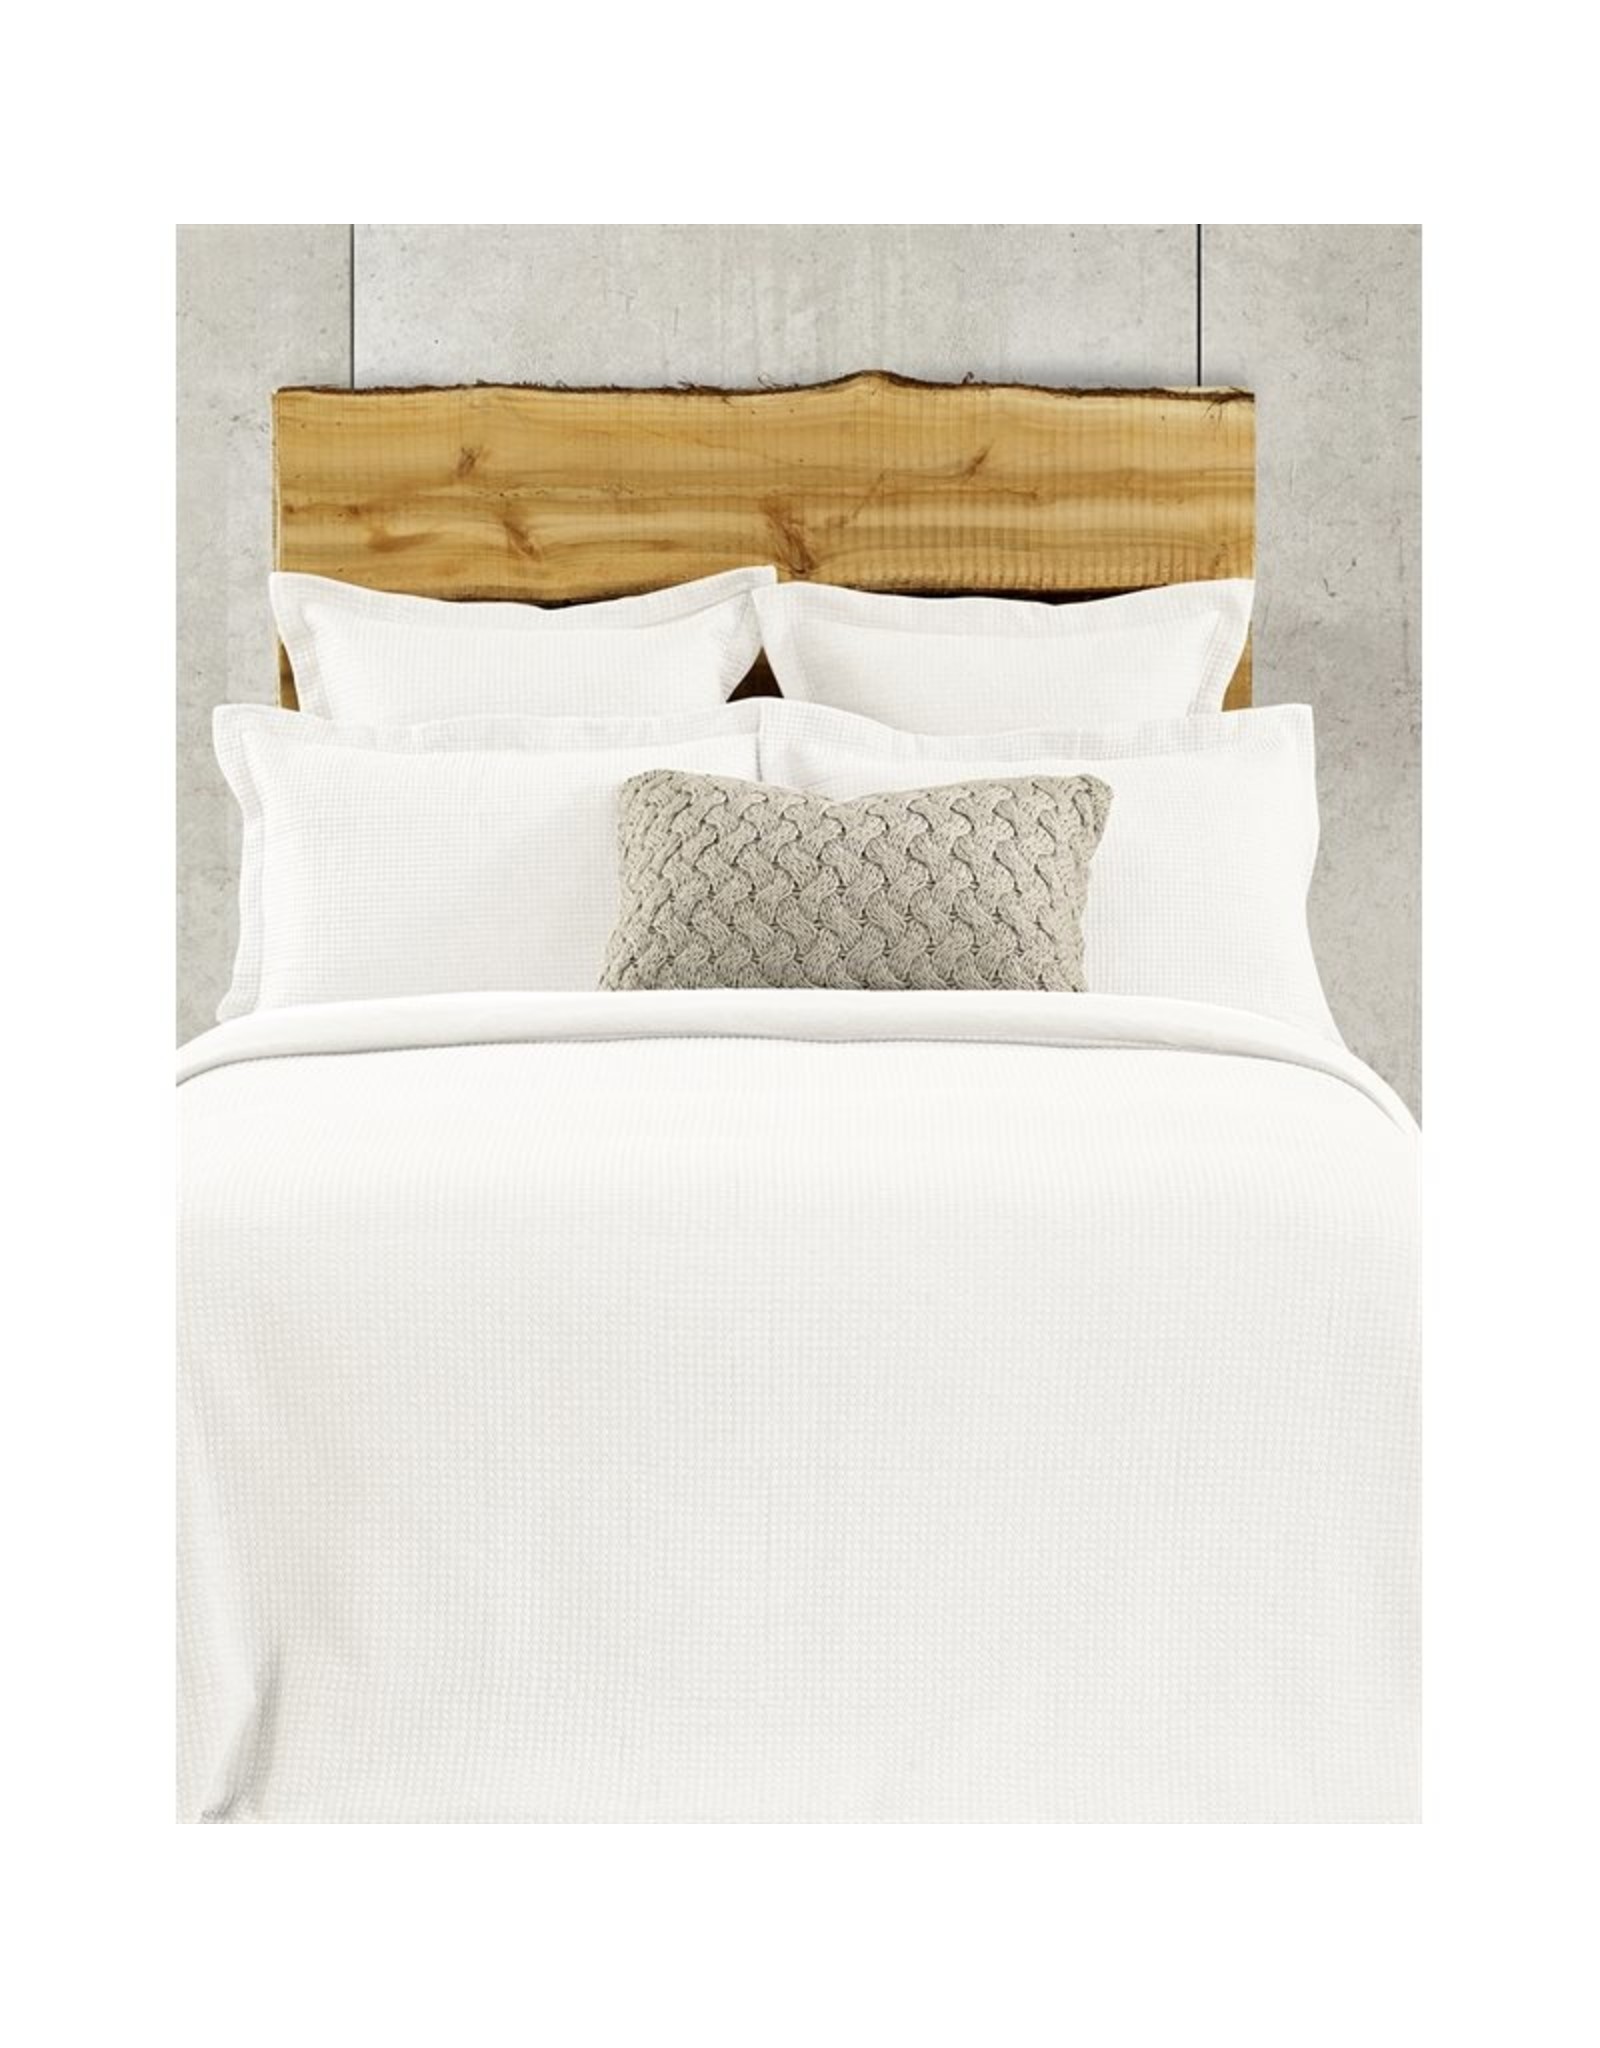 Rustic Duvet Cover With Shams The, Rustic Duvet Covers